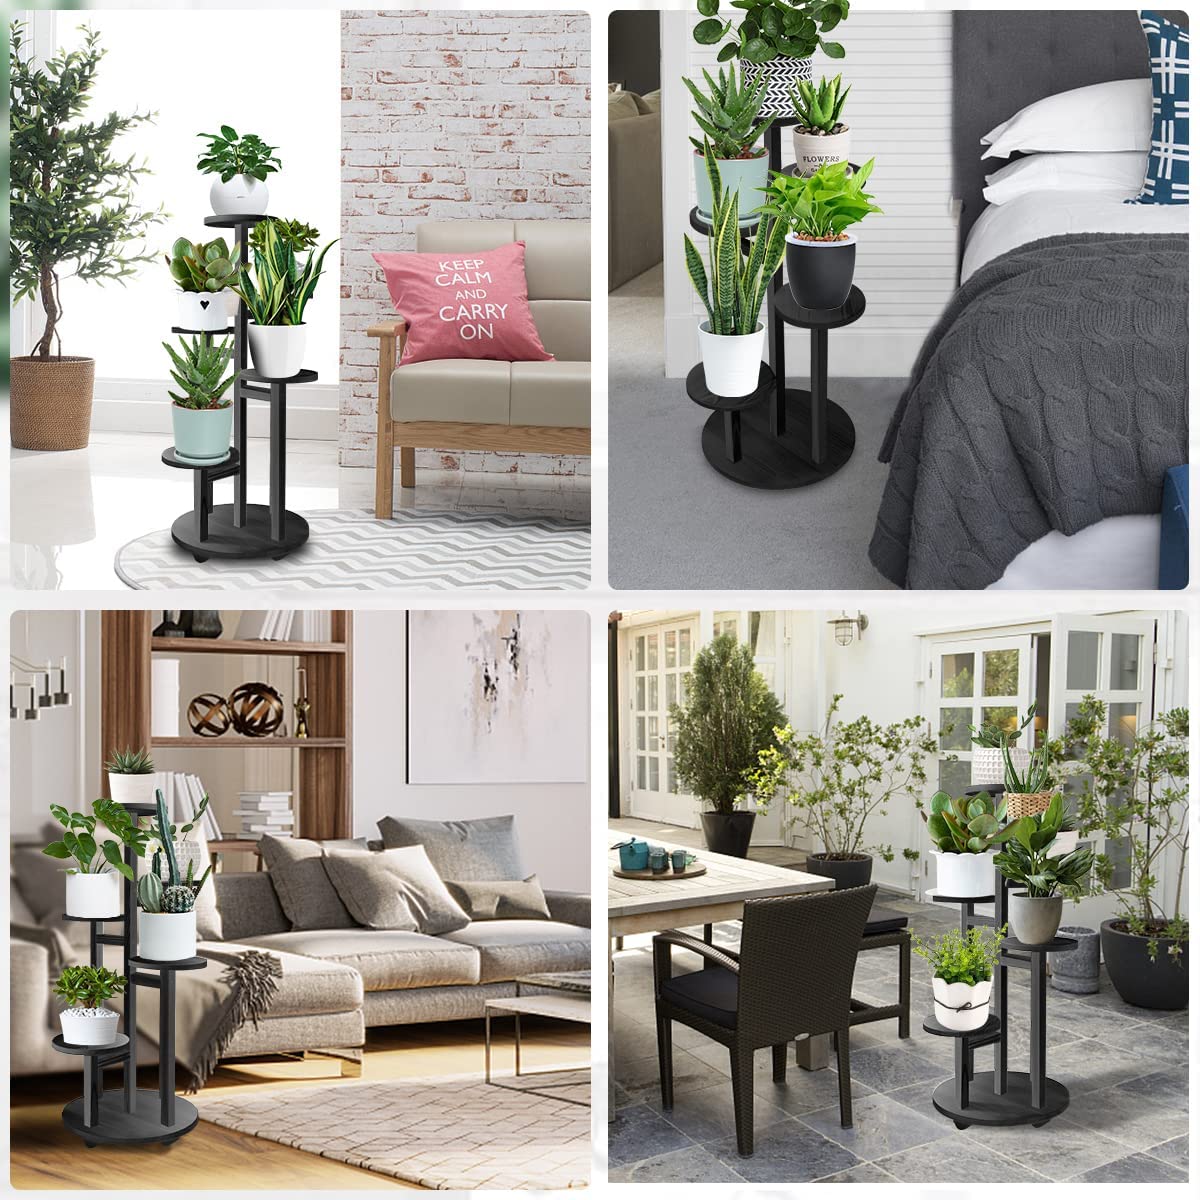 5 Tier Wooden Flower Plant Stand For Living Room, Office, Balcony